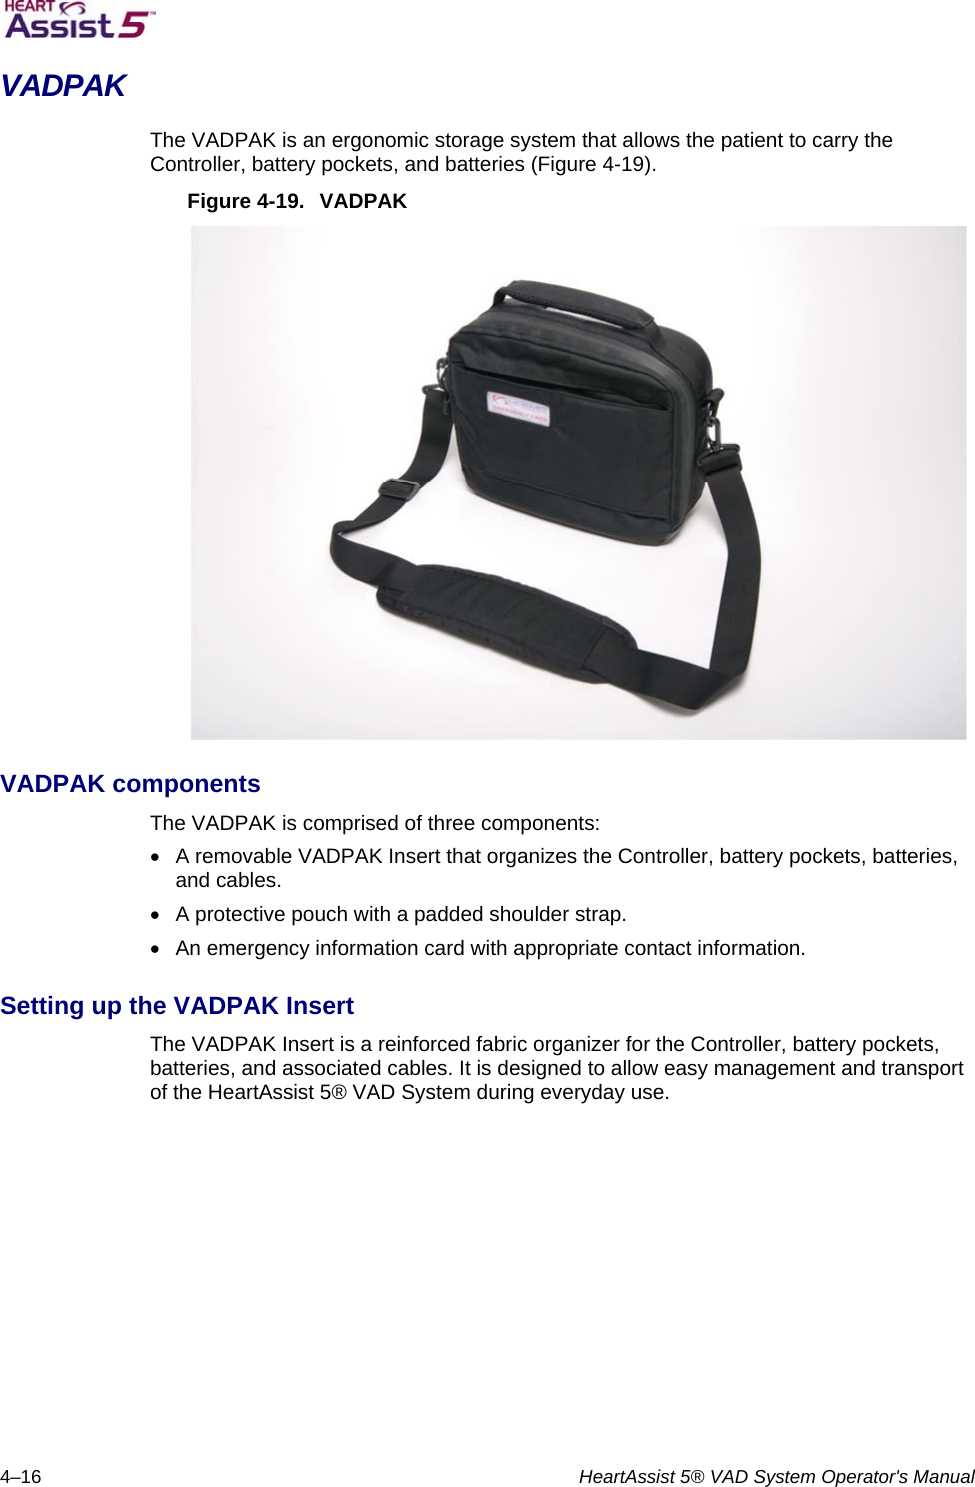   4–16  HeartAssist 5® VAD System Operator&apos;s Manual VADPAK The VADPAK is an ergonomic storage system that allows the patient to carry the Controller, battery pockets, and batteries (Figure 4-19). Figure 4-19.  VADPAK  VADPAK components The VADPAK is comprised of three components:   A removable VADPAK Insert that organizes the Controller, battery pockets, batteries, and cables.   A protective pouch with a padded shoulder strap.   An emergency information card with appropriate contact information. Setting up the VADPAK Insert The VADPAK Insert is a reinforced fabric organizer for the Controller, battery pockets, batteries, and associated cables. It is designed to allow easy management and transport of the HeartAssist 5® VAD System during everyday use. 